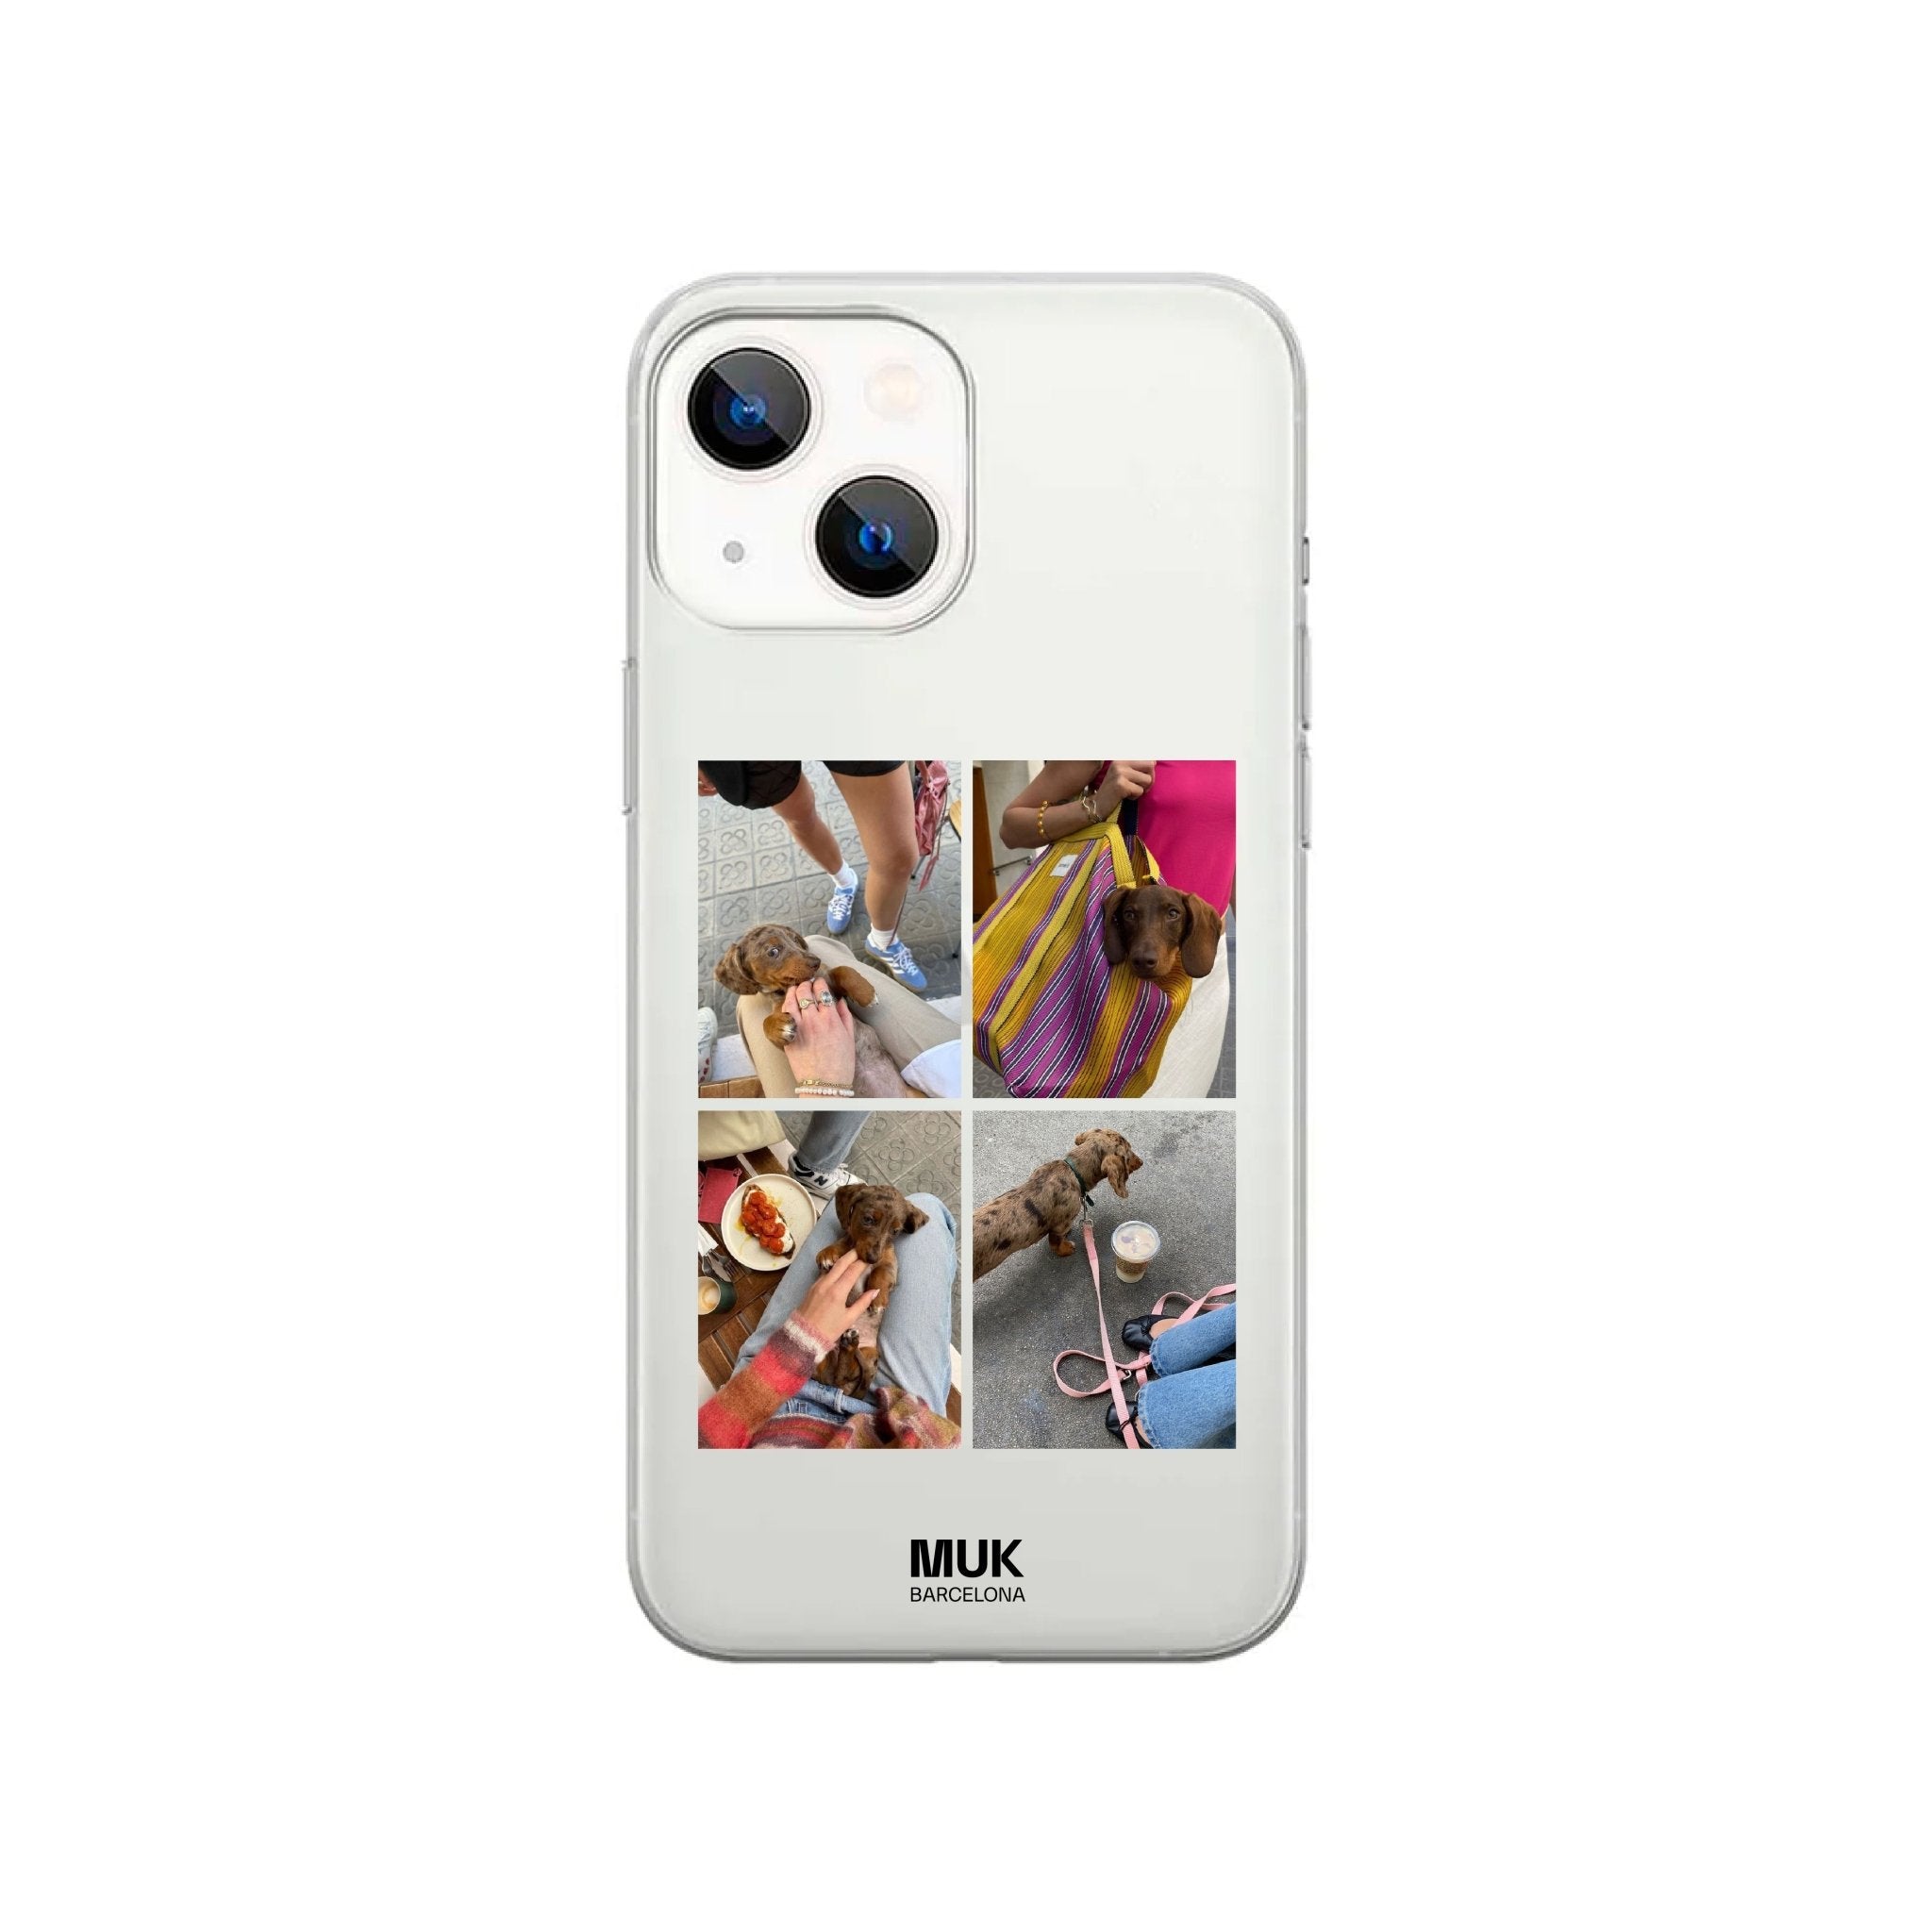 Personalized clear case Collage 4 photos. Combine the most special photos from your gallery.
